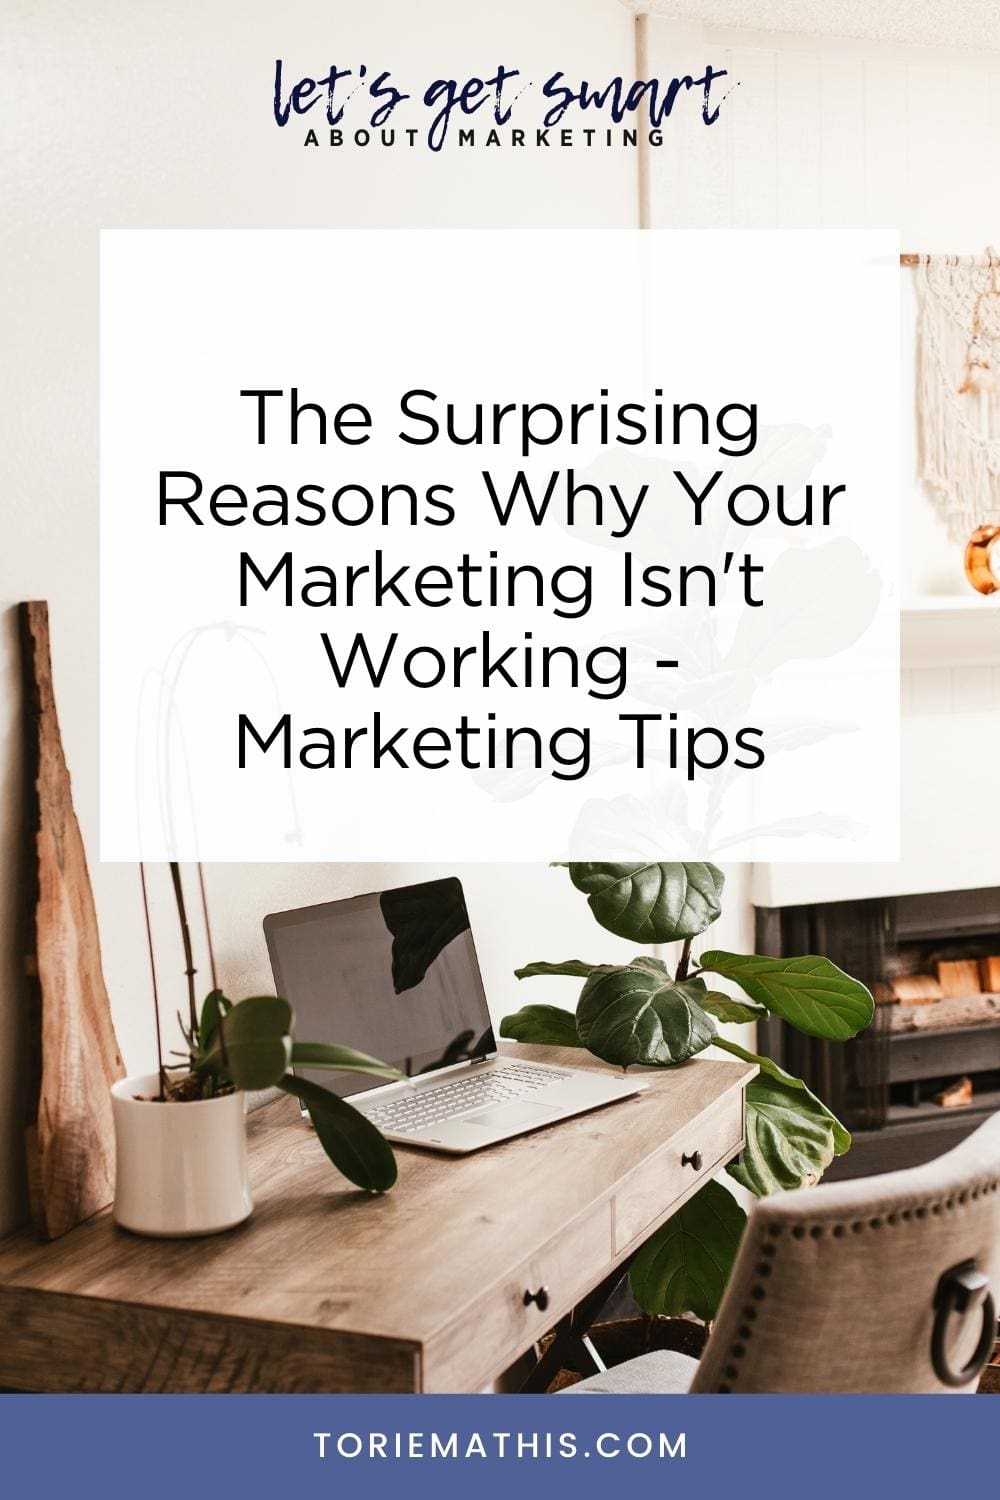 The Surprising Reasons Why Your Marketing Isn't Working - Marketing Tips